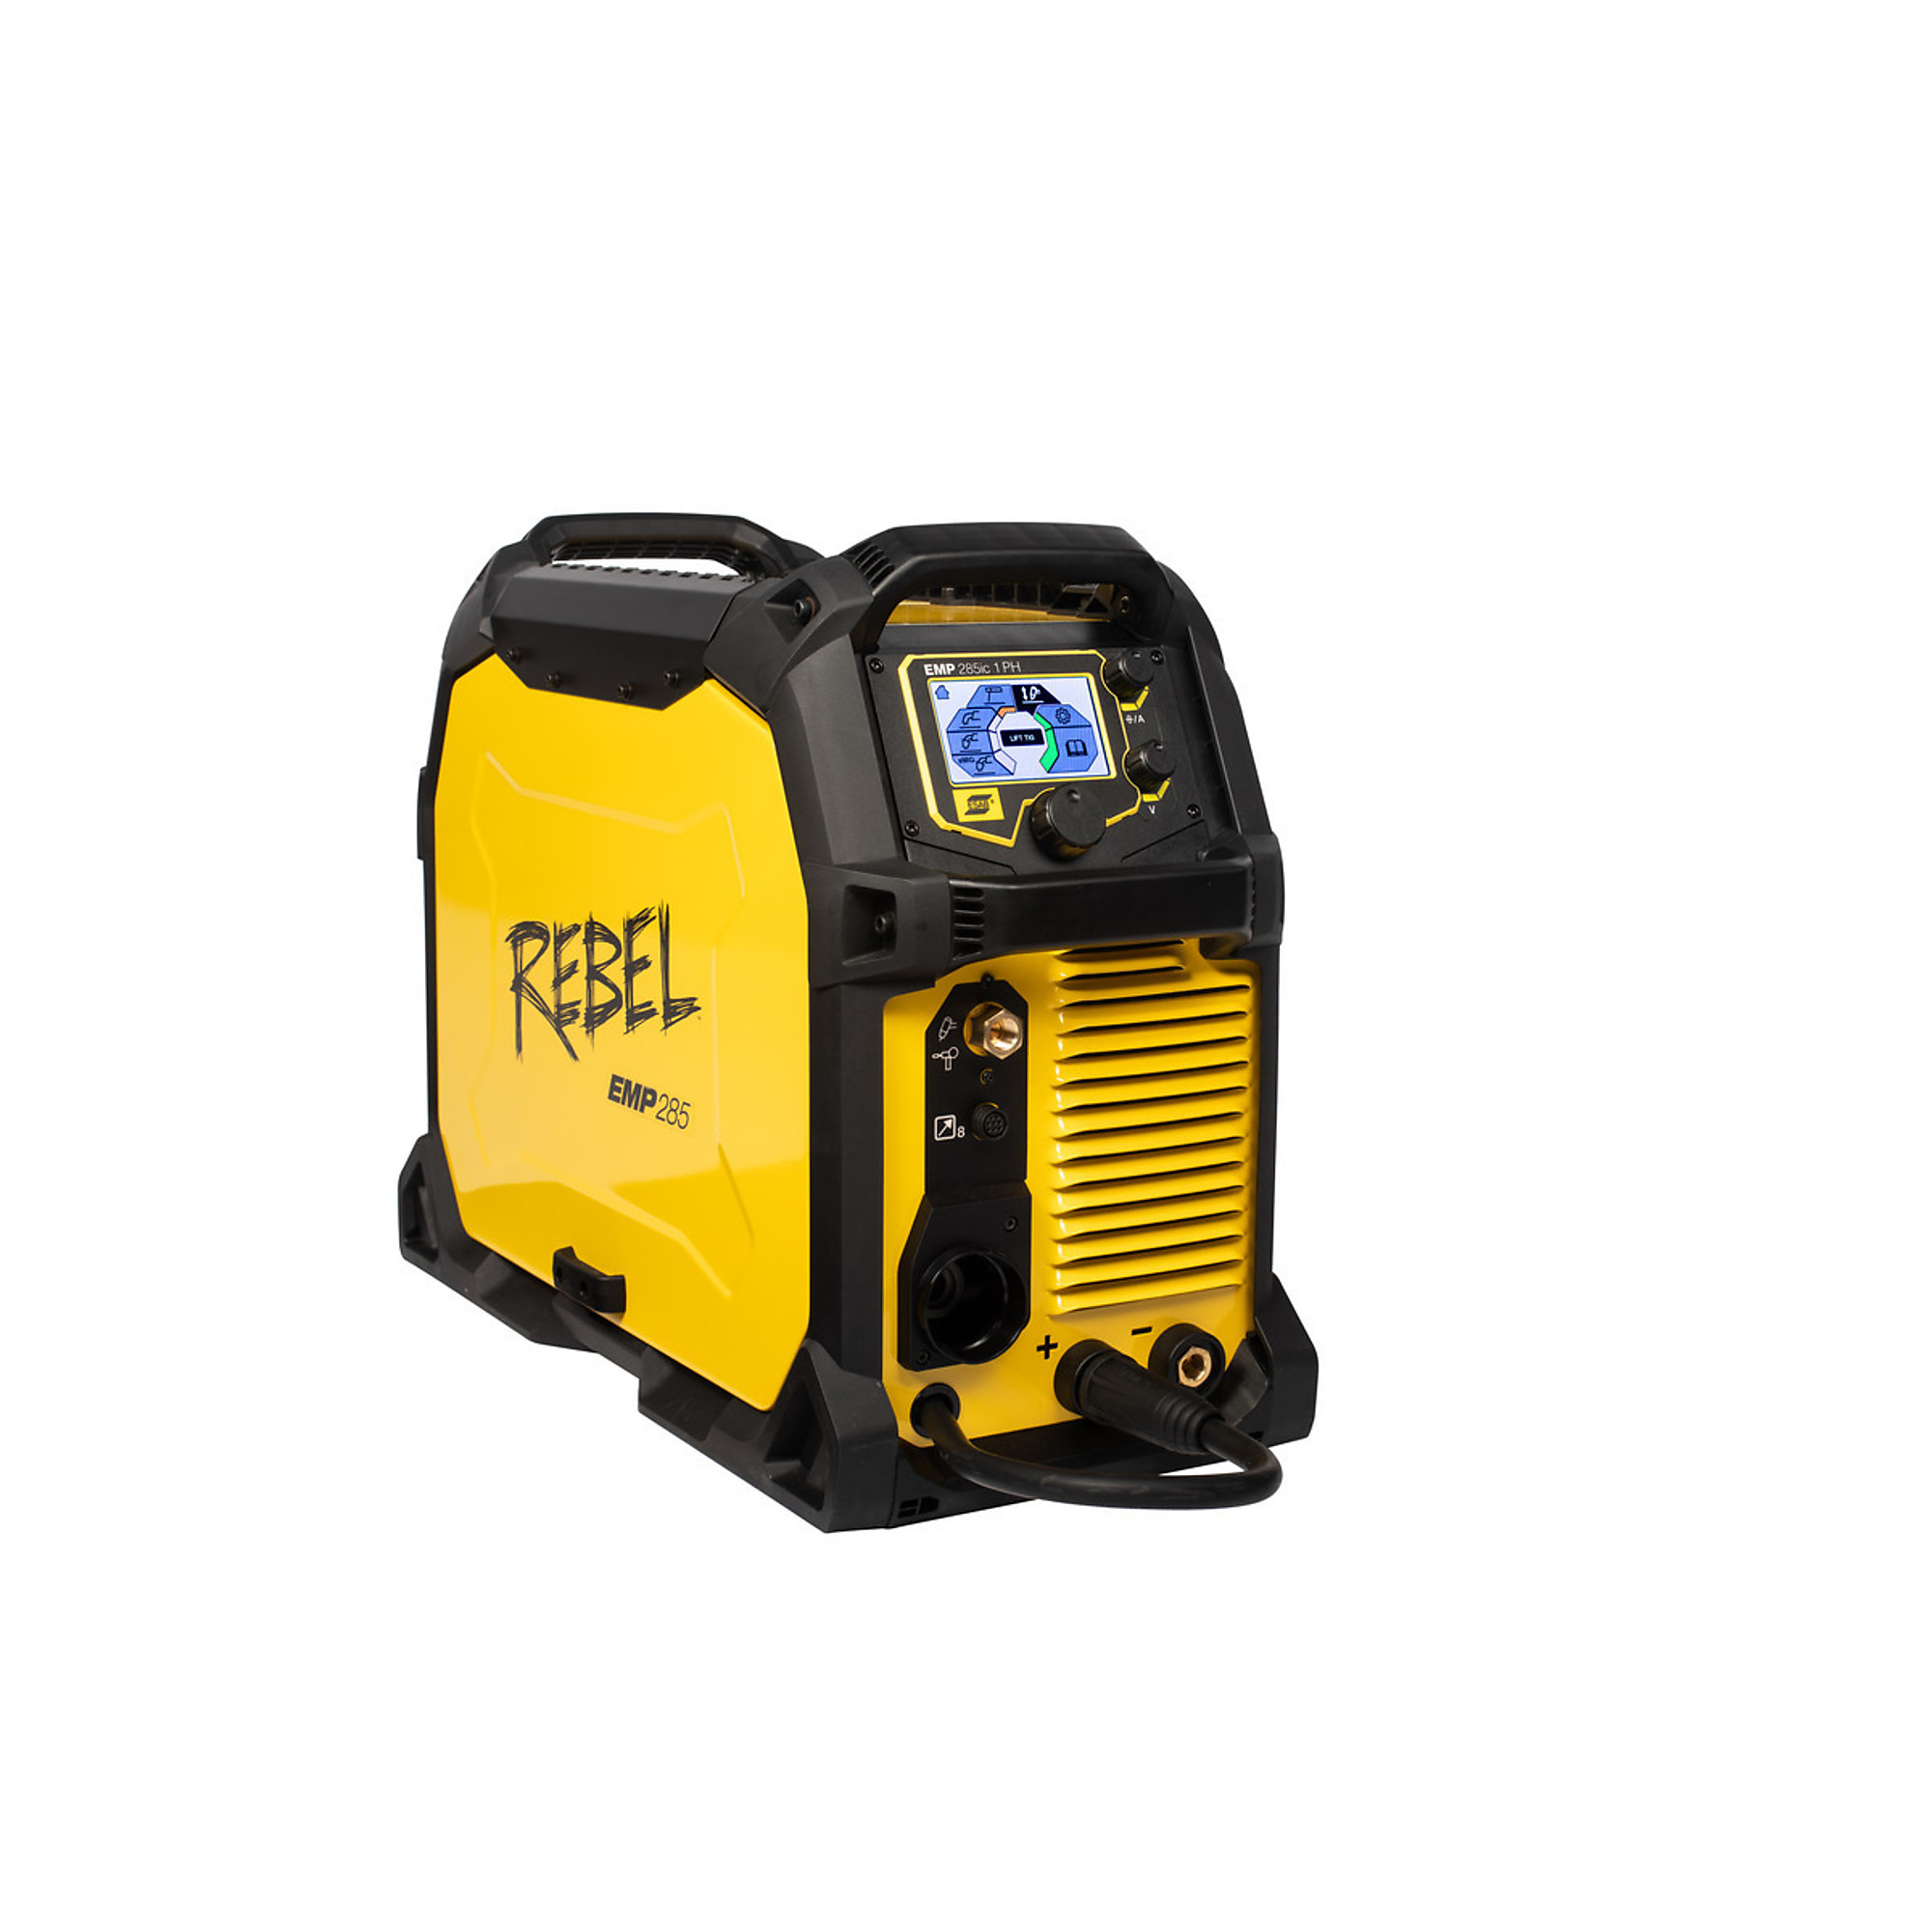 ESAB, Rebel EMP 285ic Multi-Process Welder 3 Phase, Volts 460-575 Max. Amps 300 Mig Ready, Model 0558102556